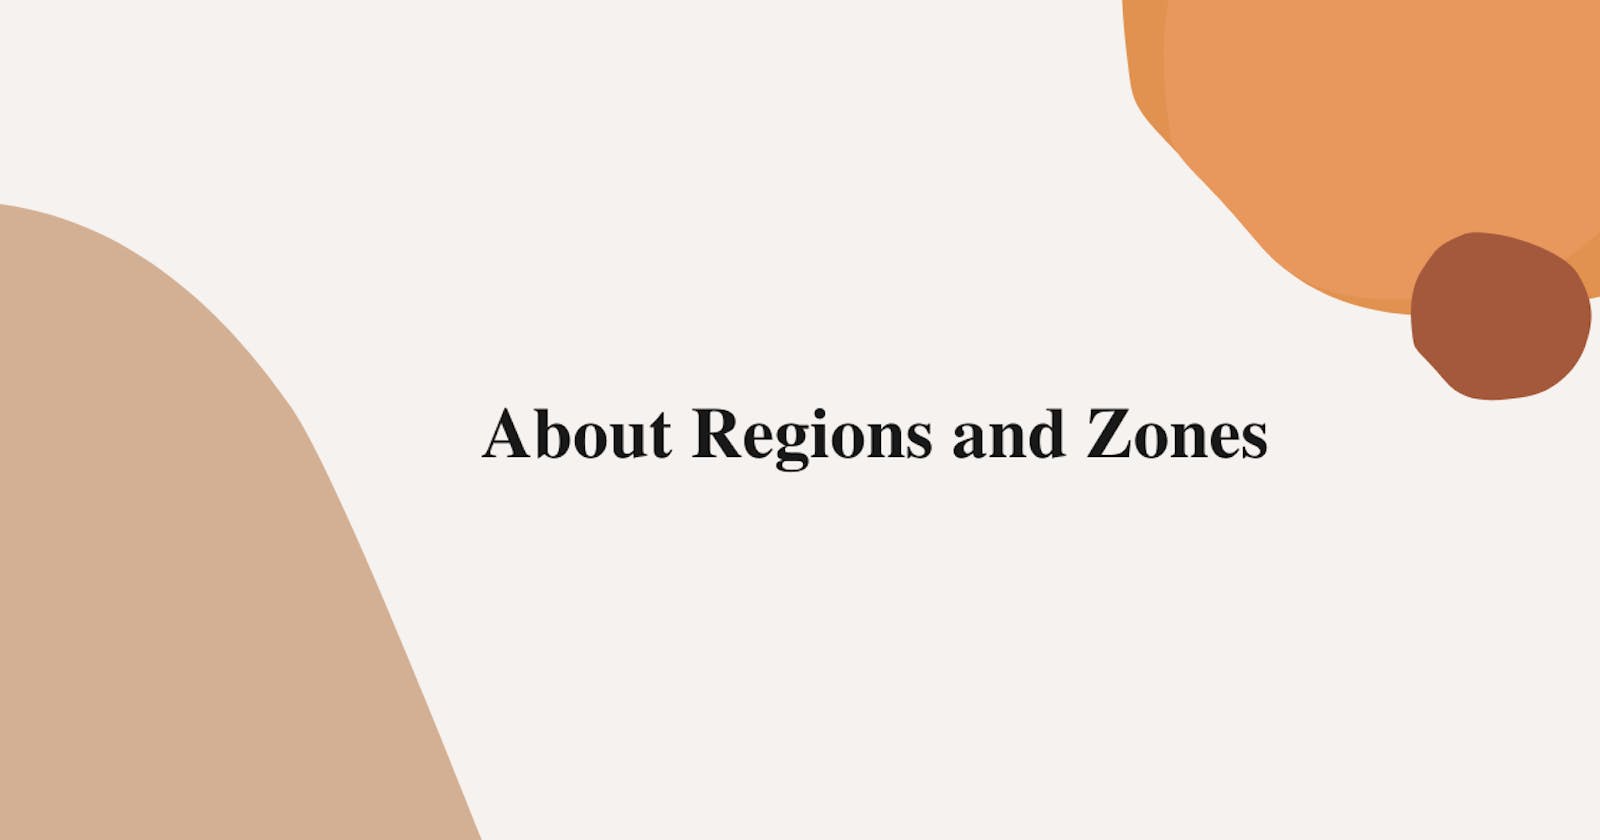 About Regions and Zones